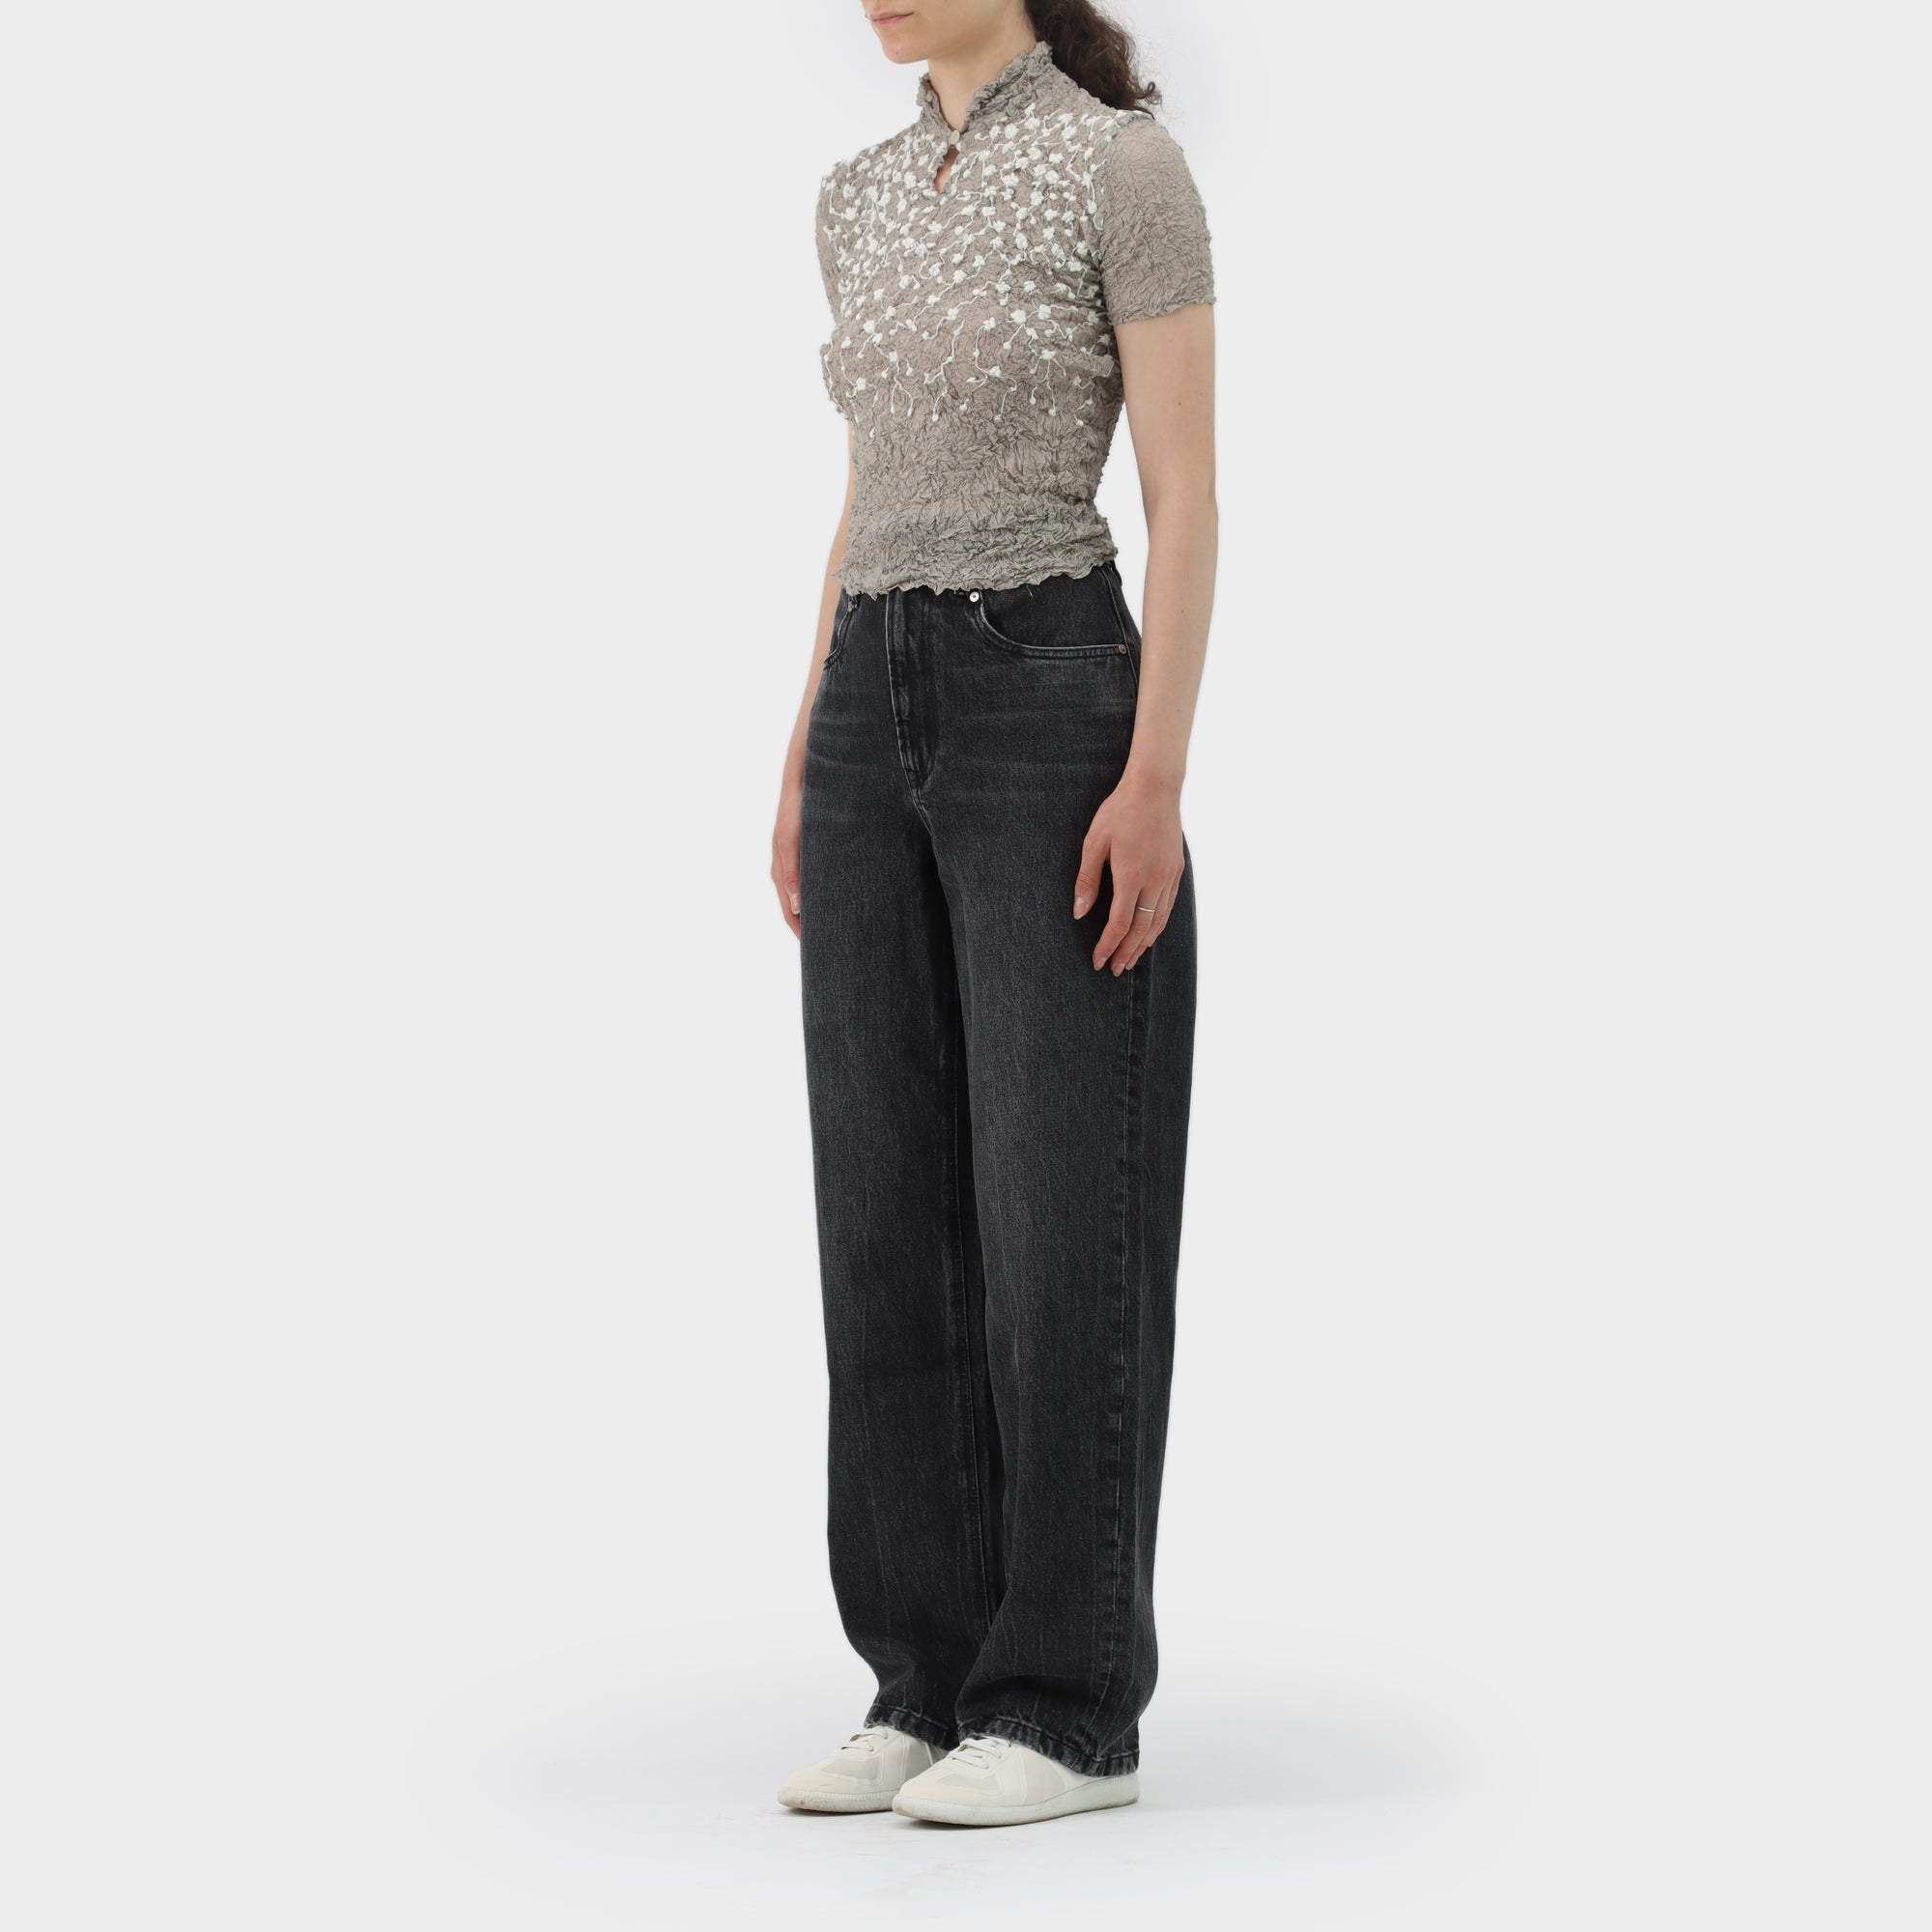 Issey Miyake White Label Floral Embroidered Scrunch Pleat Top